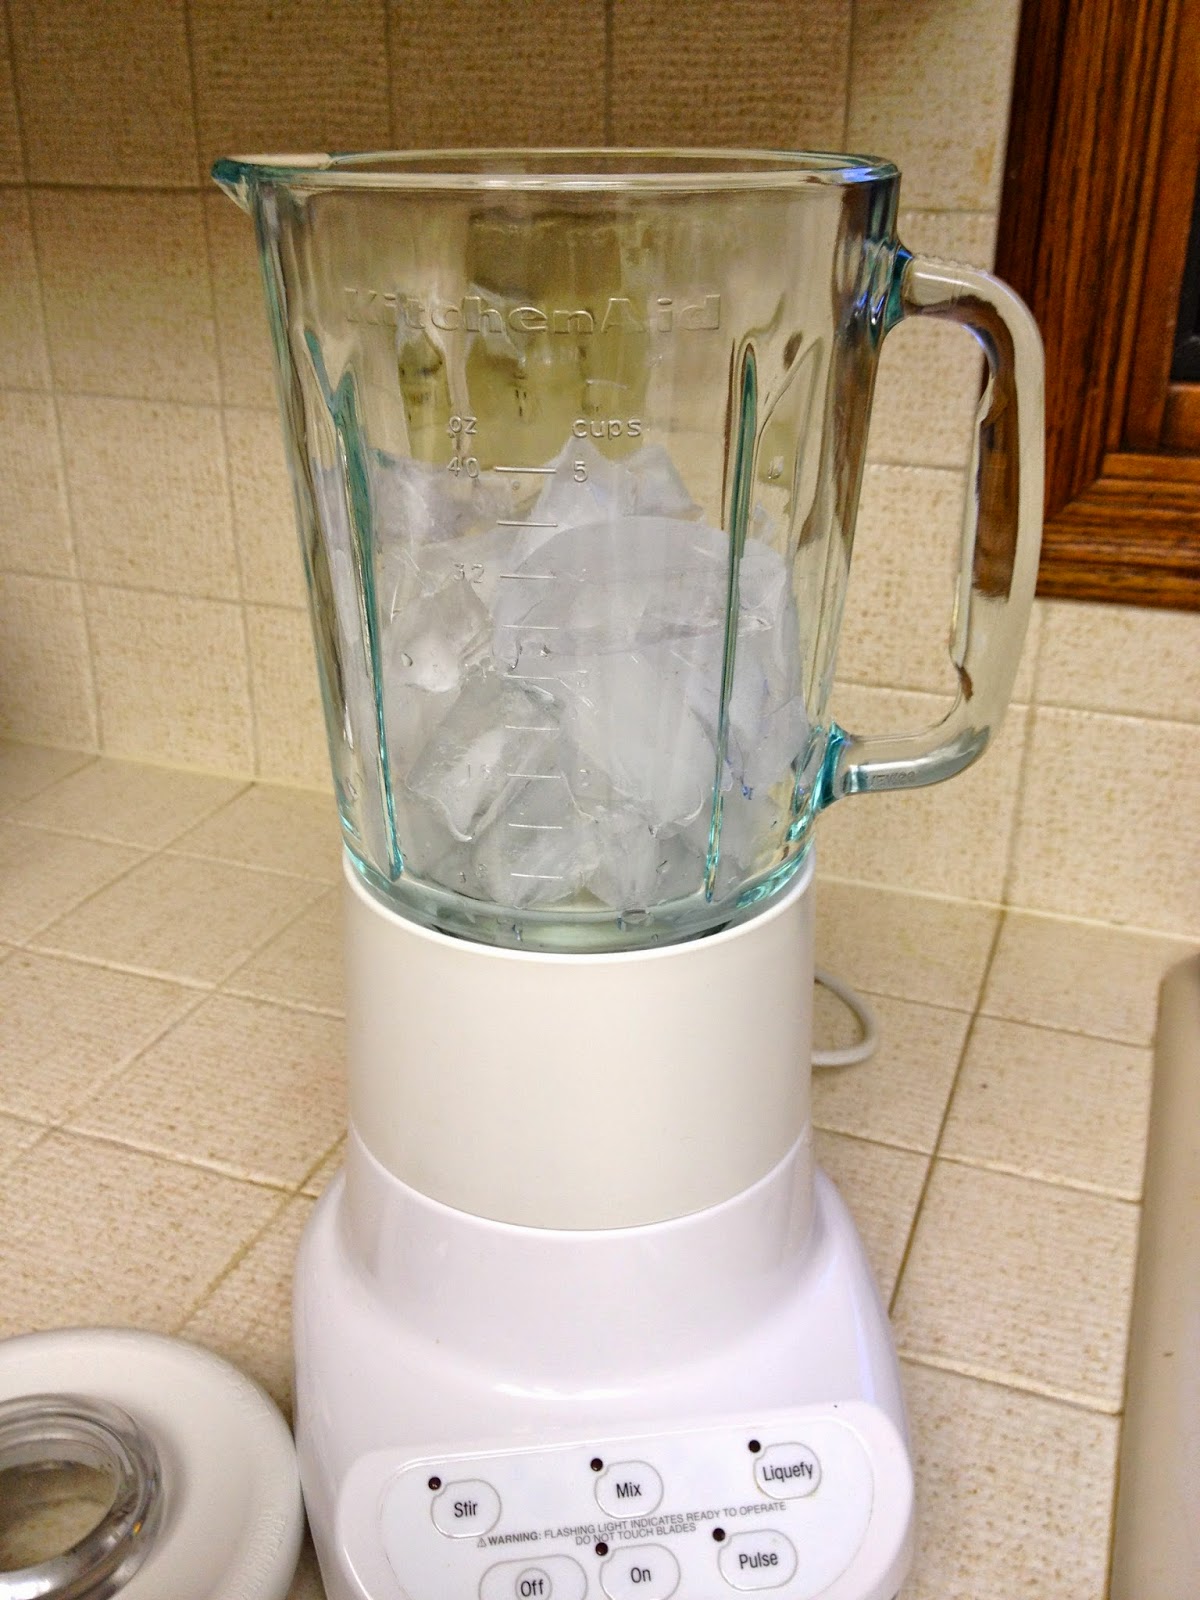 Fill 12 of the blender with ice cubes.